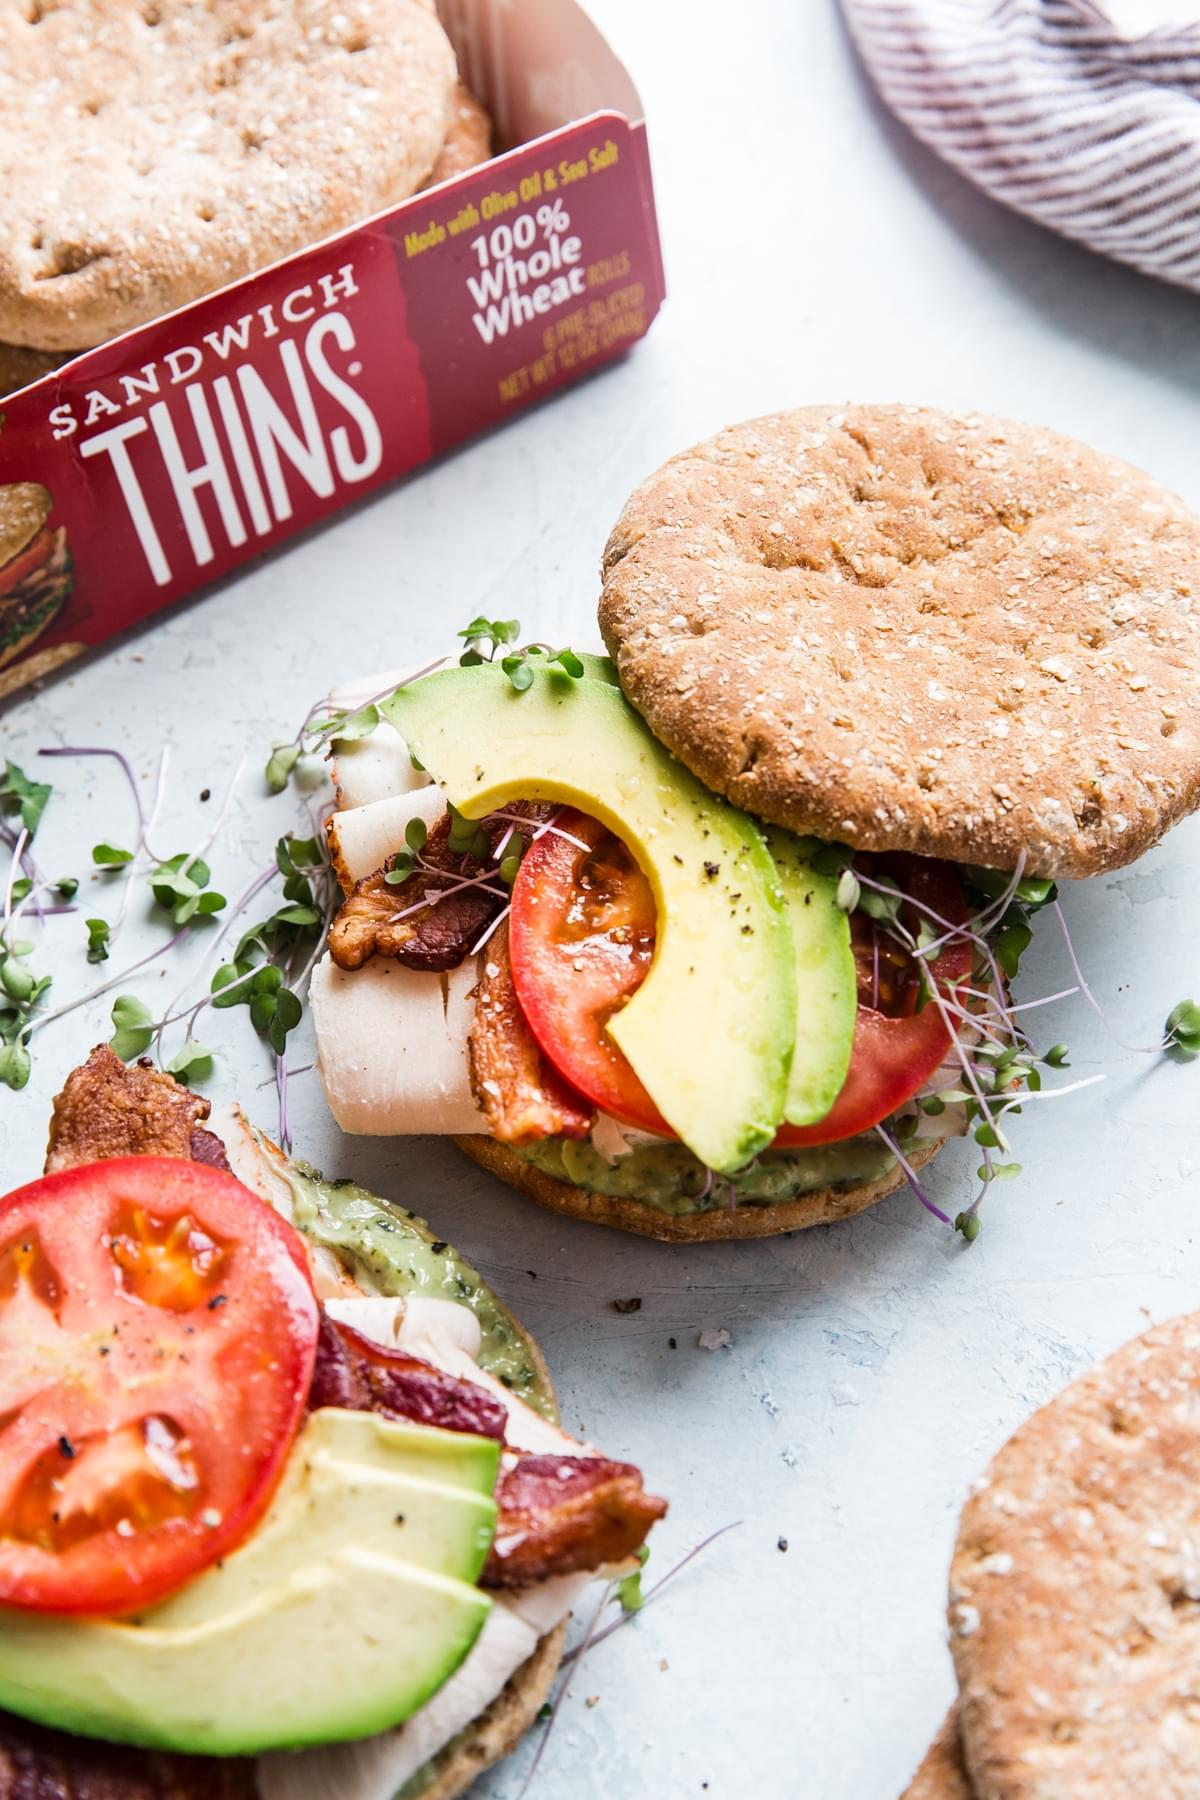 Turkey Bacon Club Sandwich with avocado, tomato and sprouts on oroweat sandwich thins